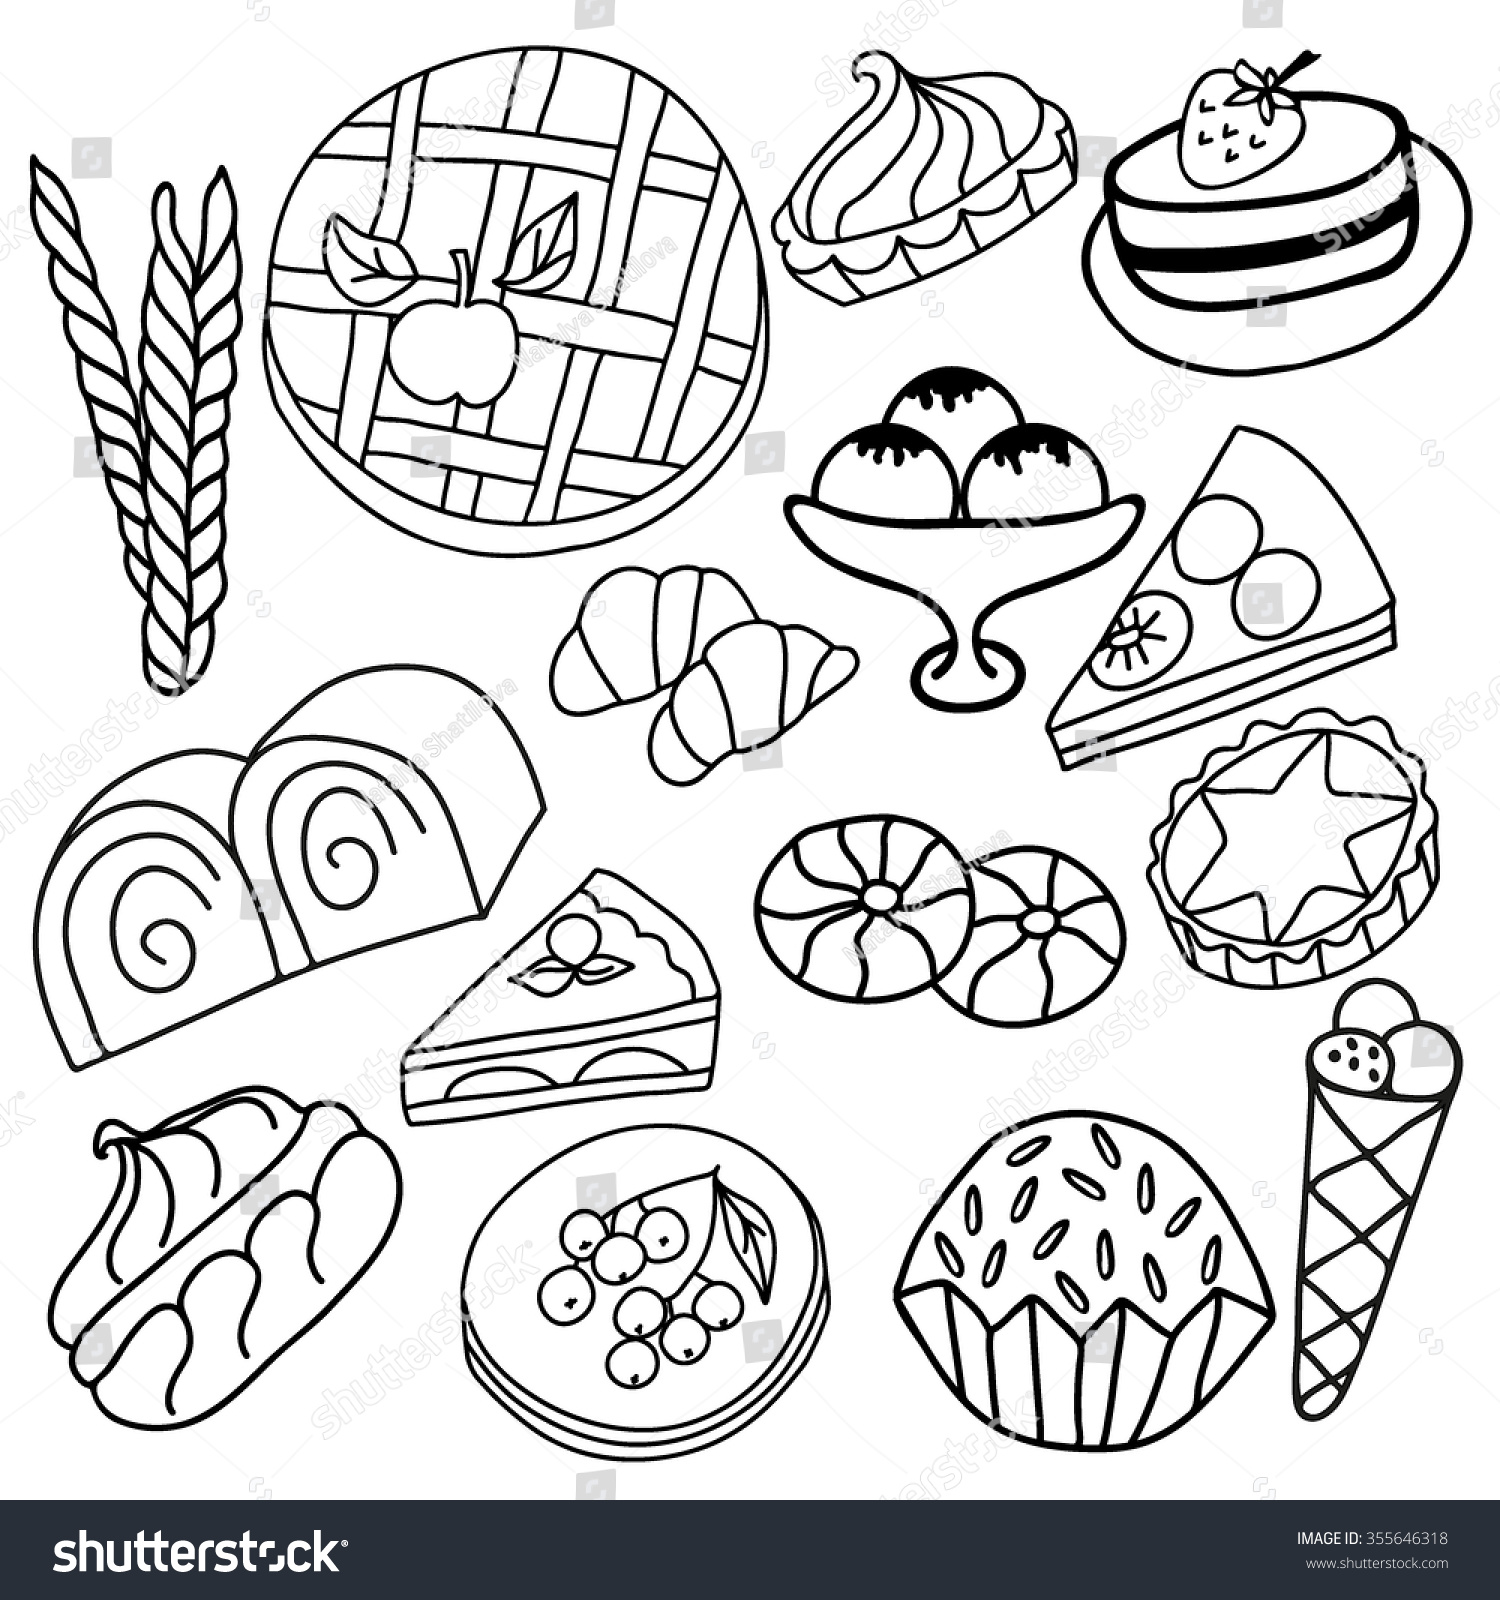 Coloring Book. Hand Drawn.Dessert. Adults, Children. Black And White ...